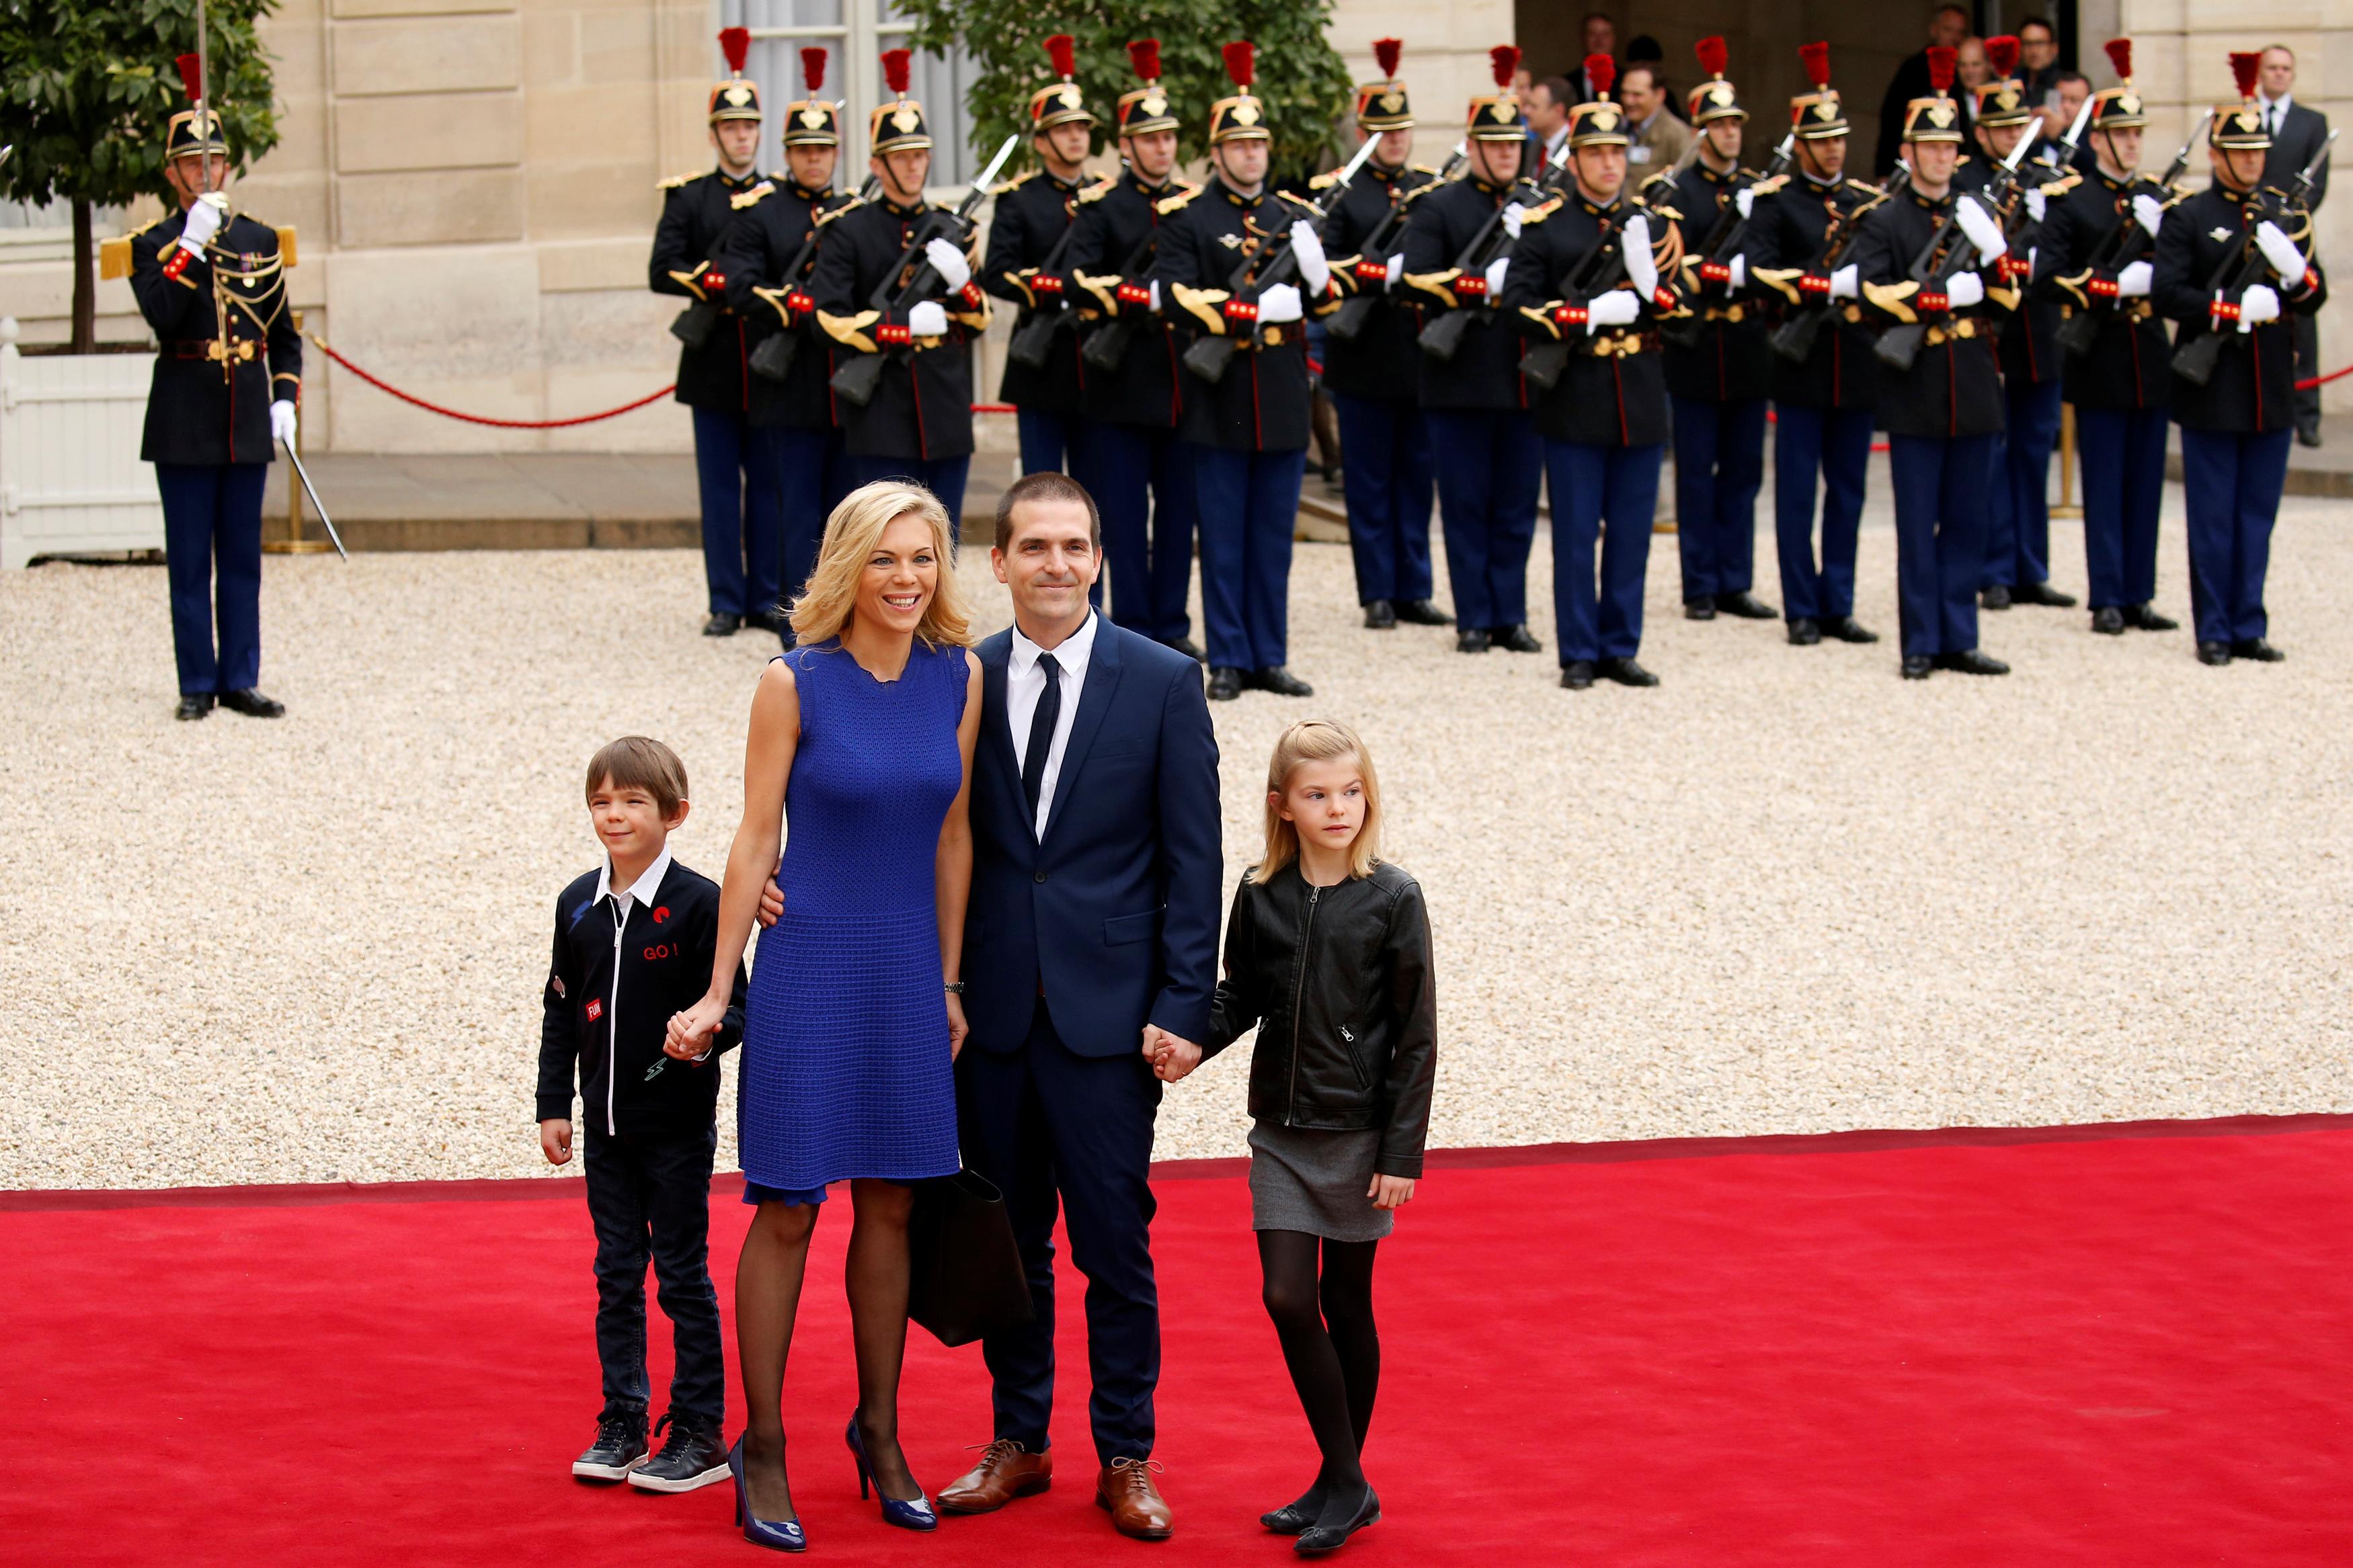 Laurence Auziere Jourdan, daughter of Brigitte Trogneux, and her husband Guillaume arrive to attend 